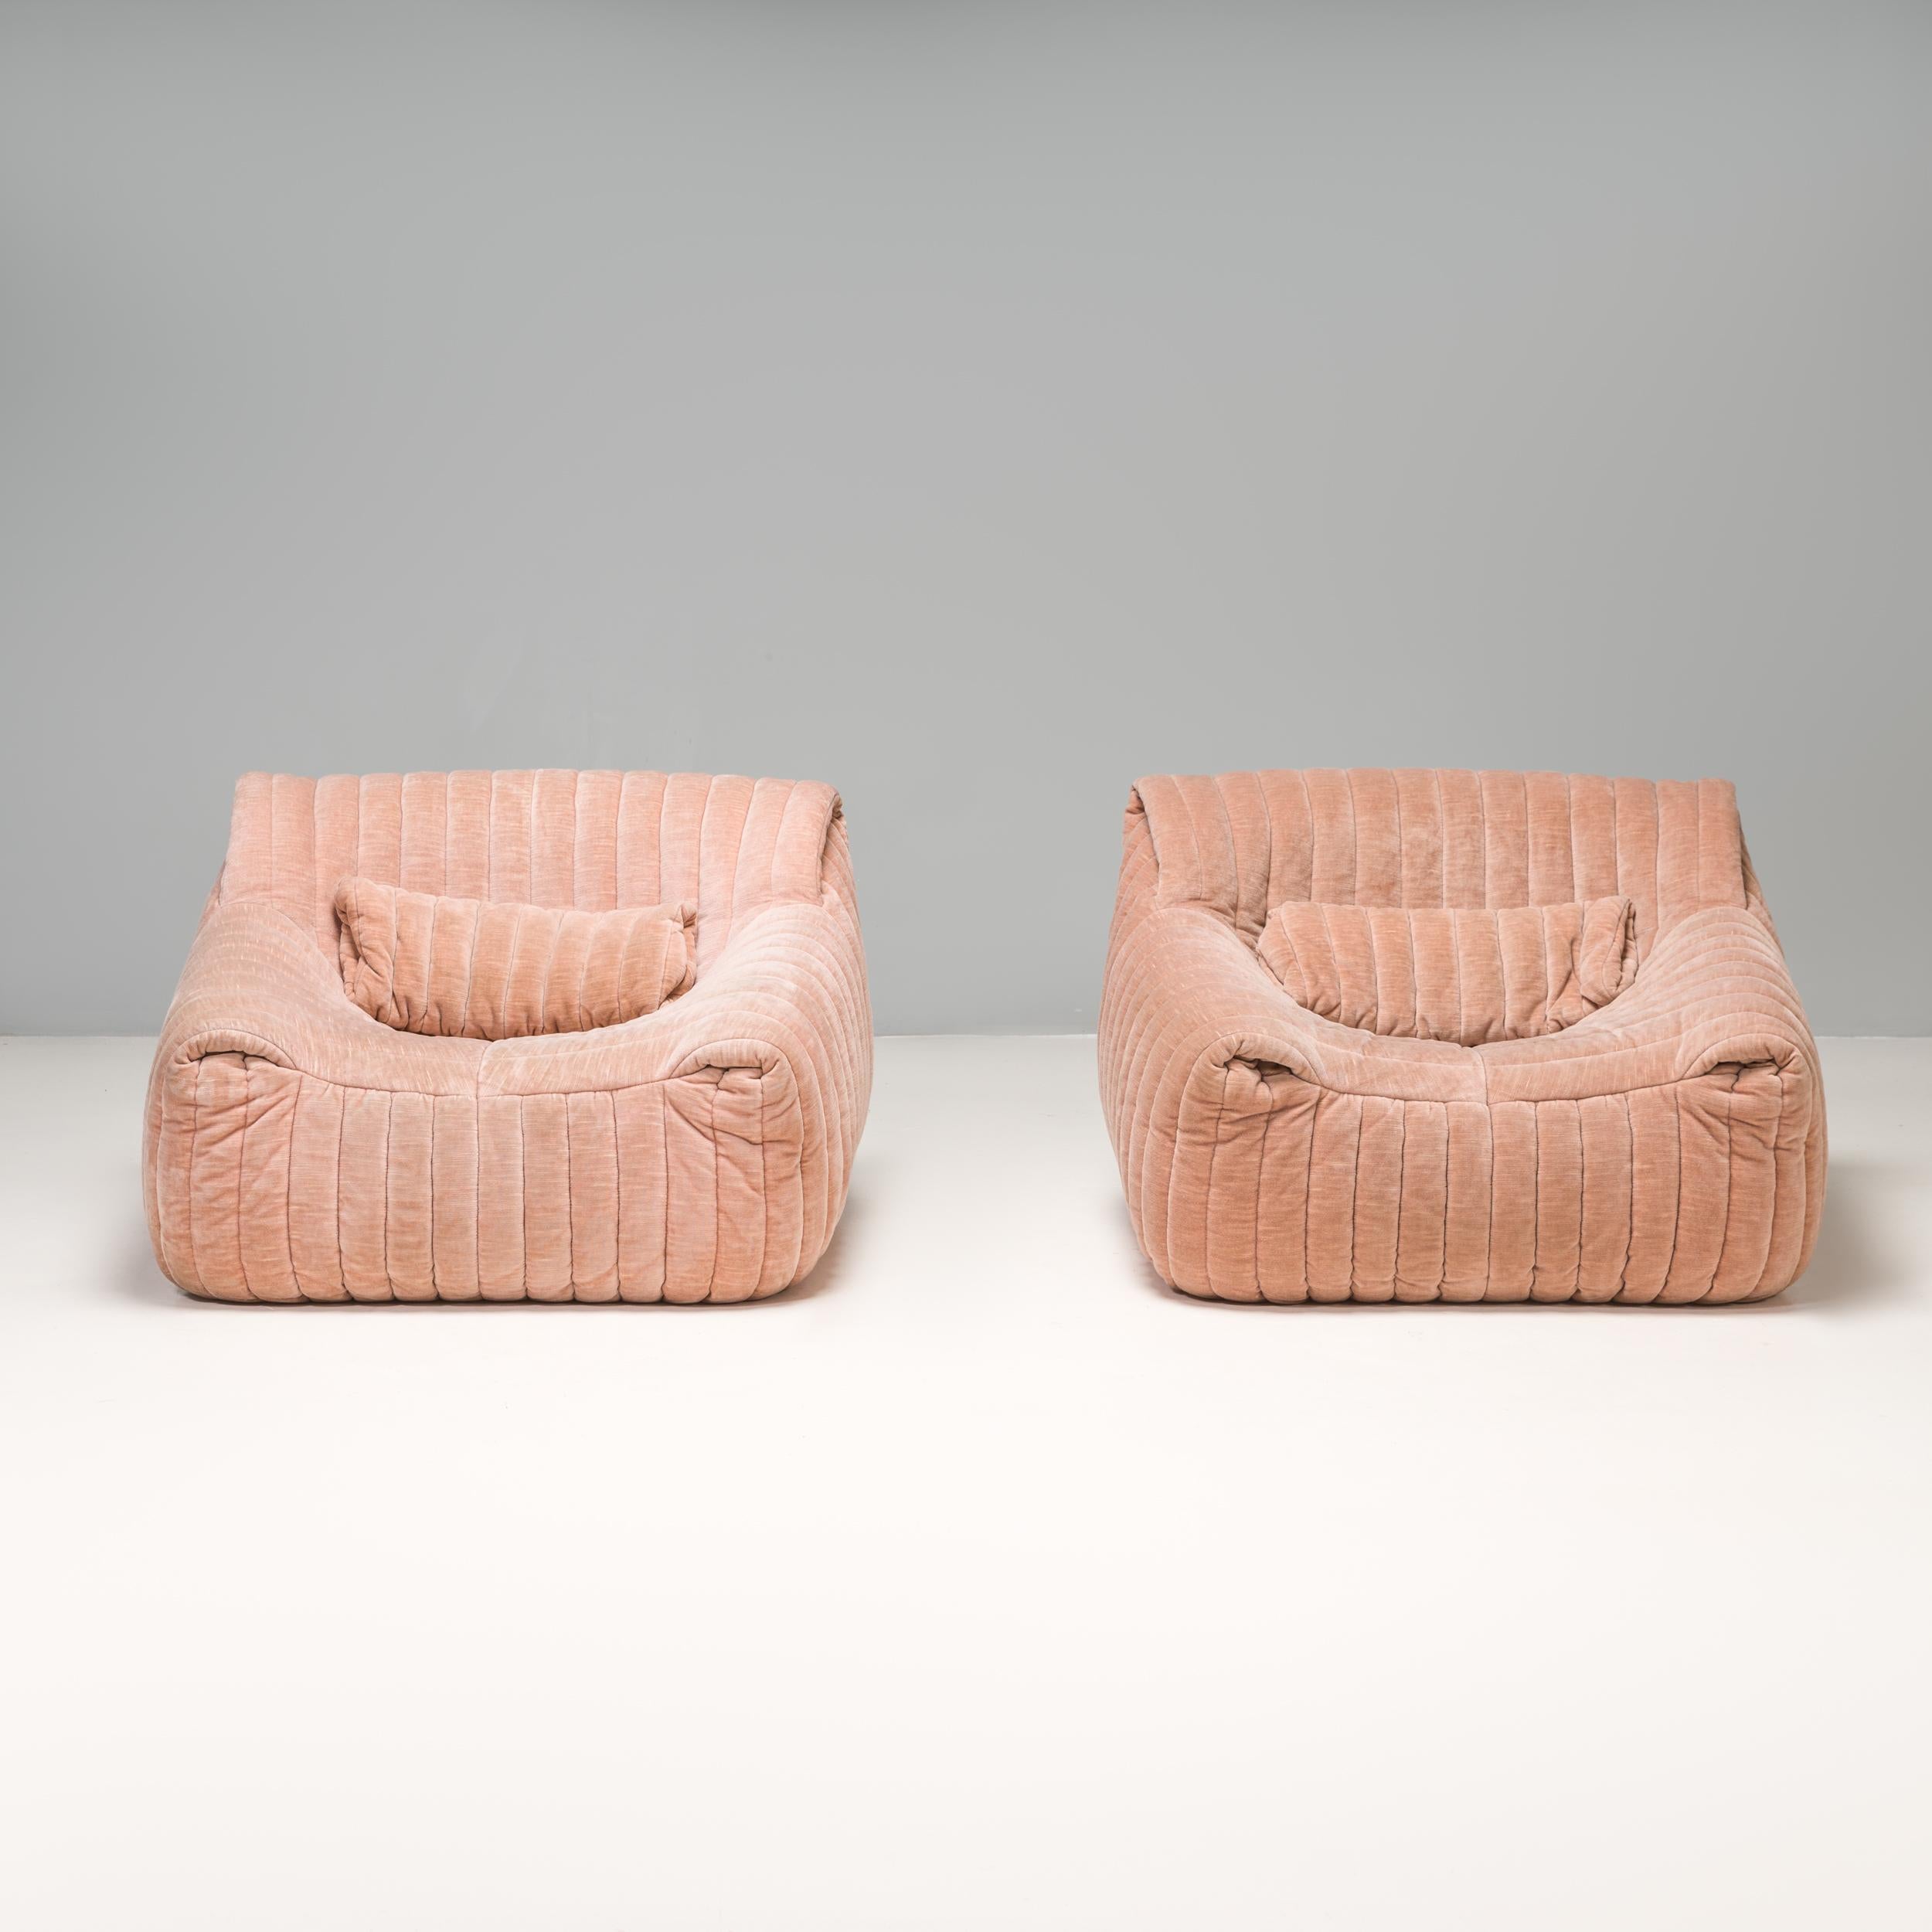 An iconic 1970s design, the Sandra sofa collection was designed by Annie Hiéronimus for Cinna after she joined the Roset Bureau d'Etudes in 1976.

Constructed from foam, these armchairs have a solid form which is fully upholstered in biscuit beige